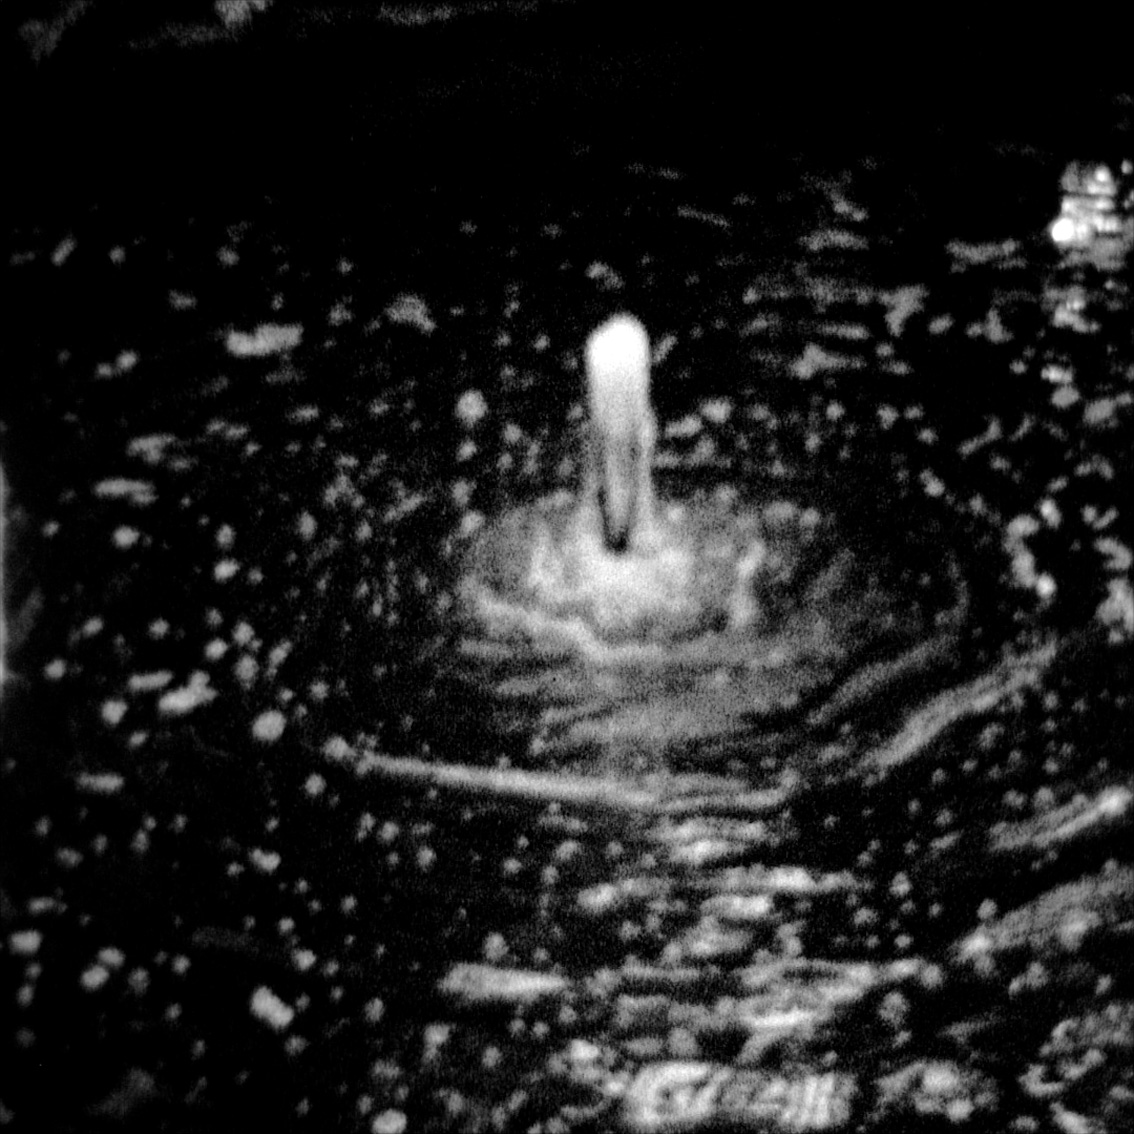 An abstract image of a fountain taken with a super-8 camera.